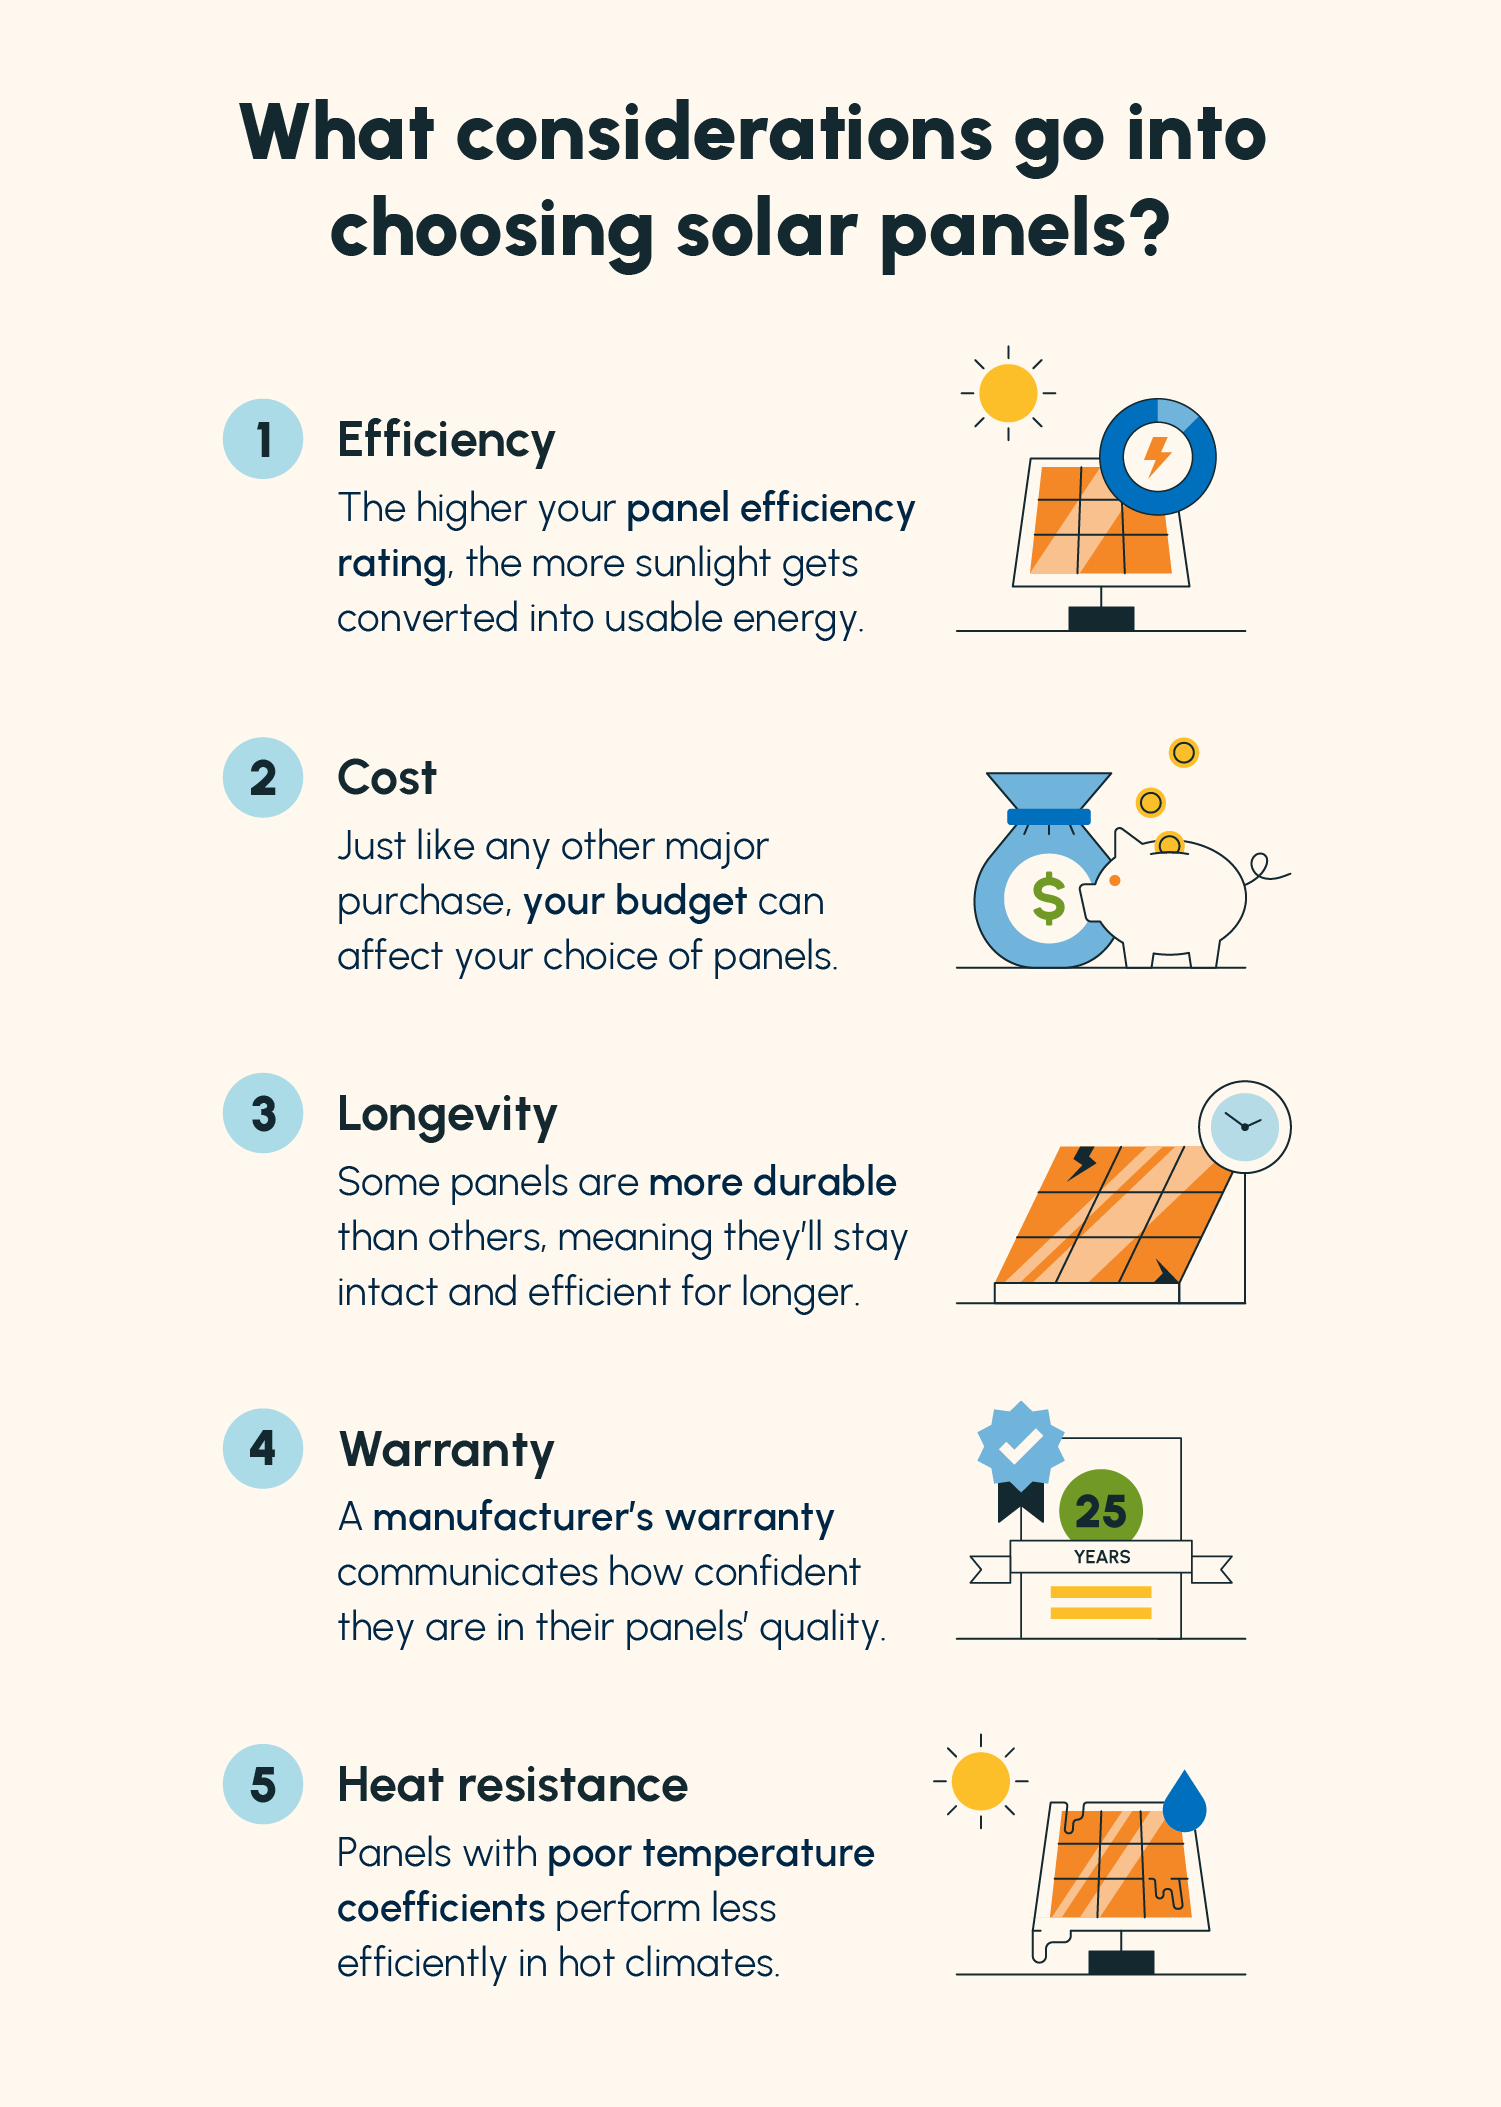 An illustrated list of five qualities that matter when choosing solar panels